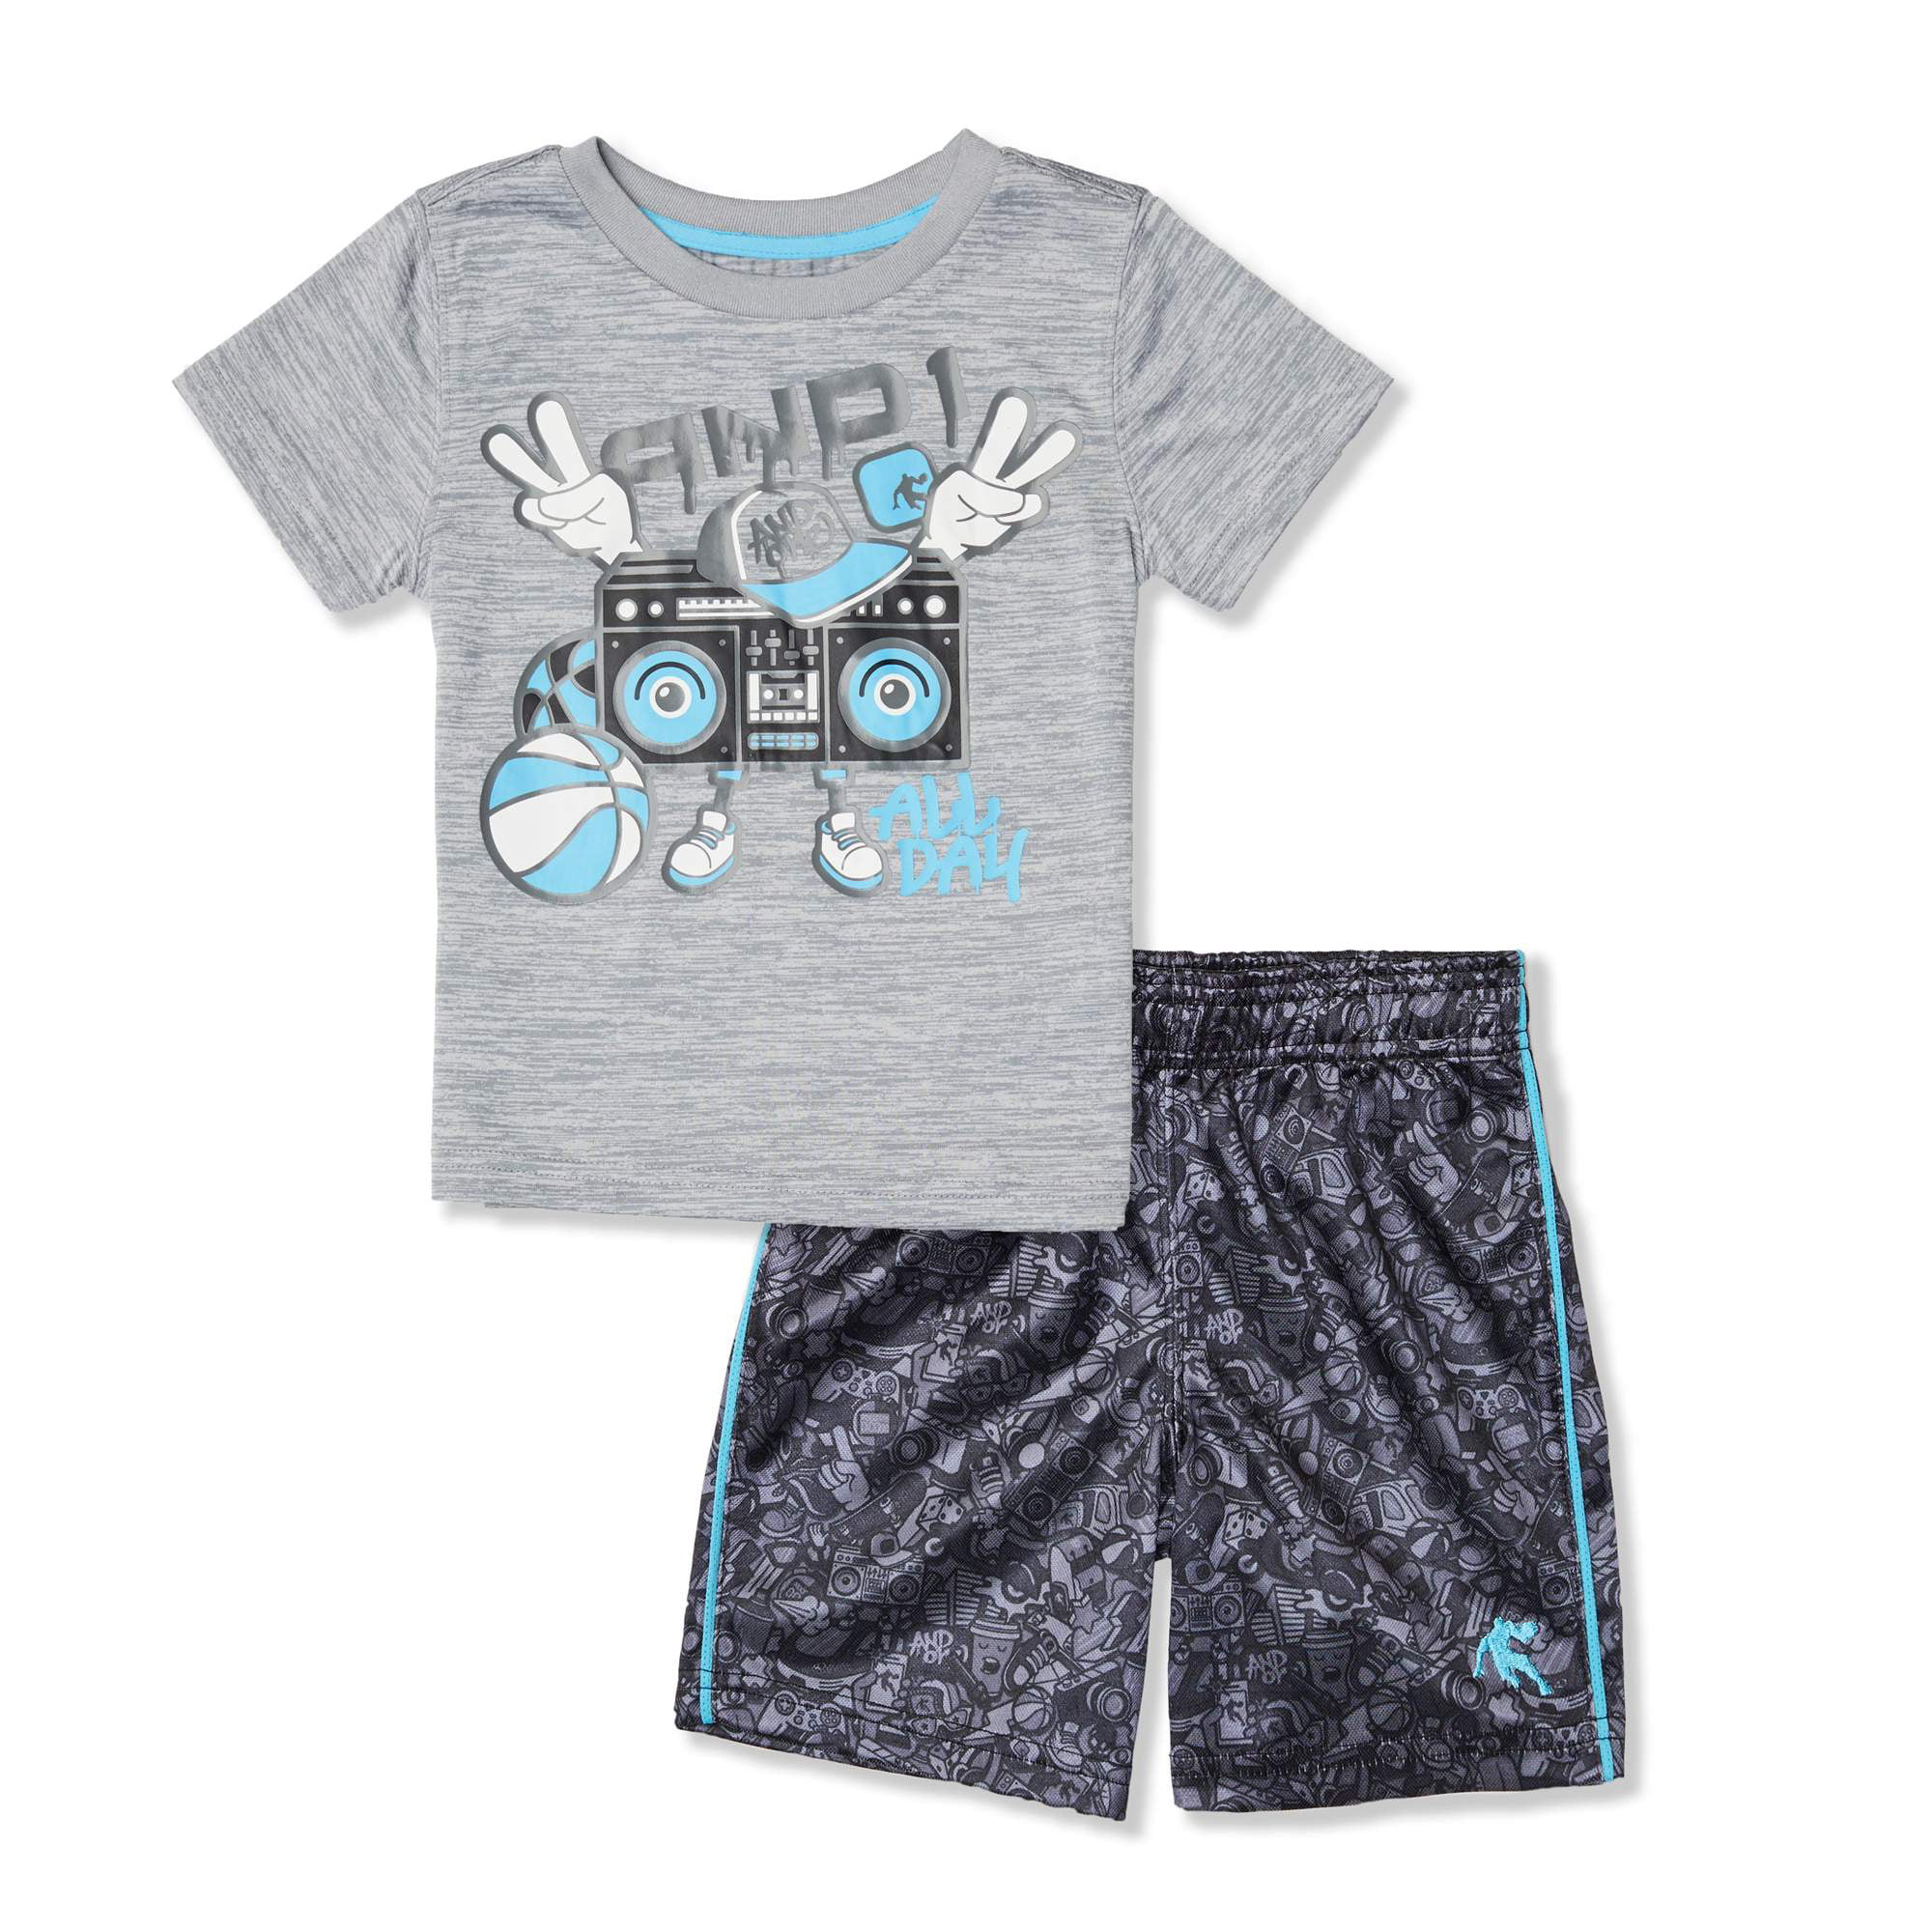 Toddler Boy Graphic T-shirt & Jersey Shorts, 2pc Active Outfit Set ...